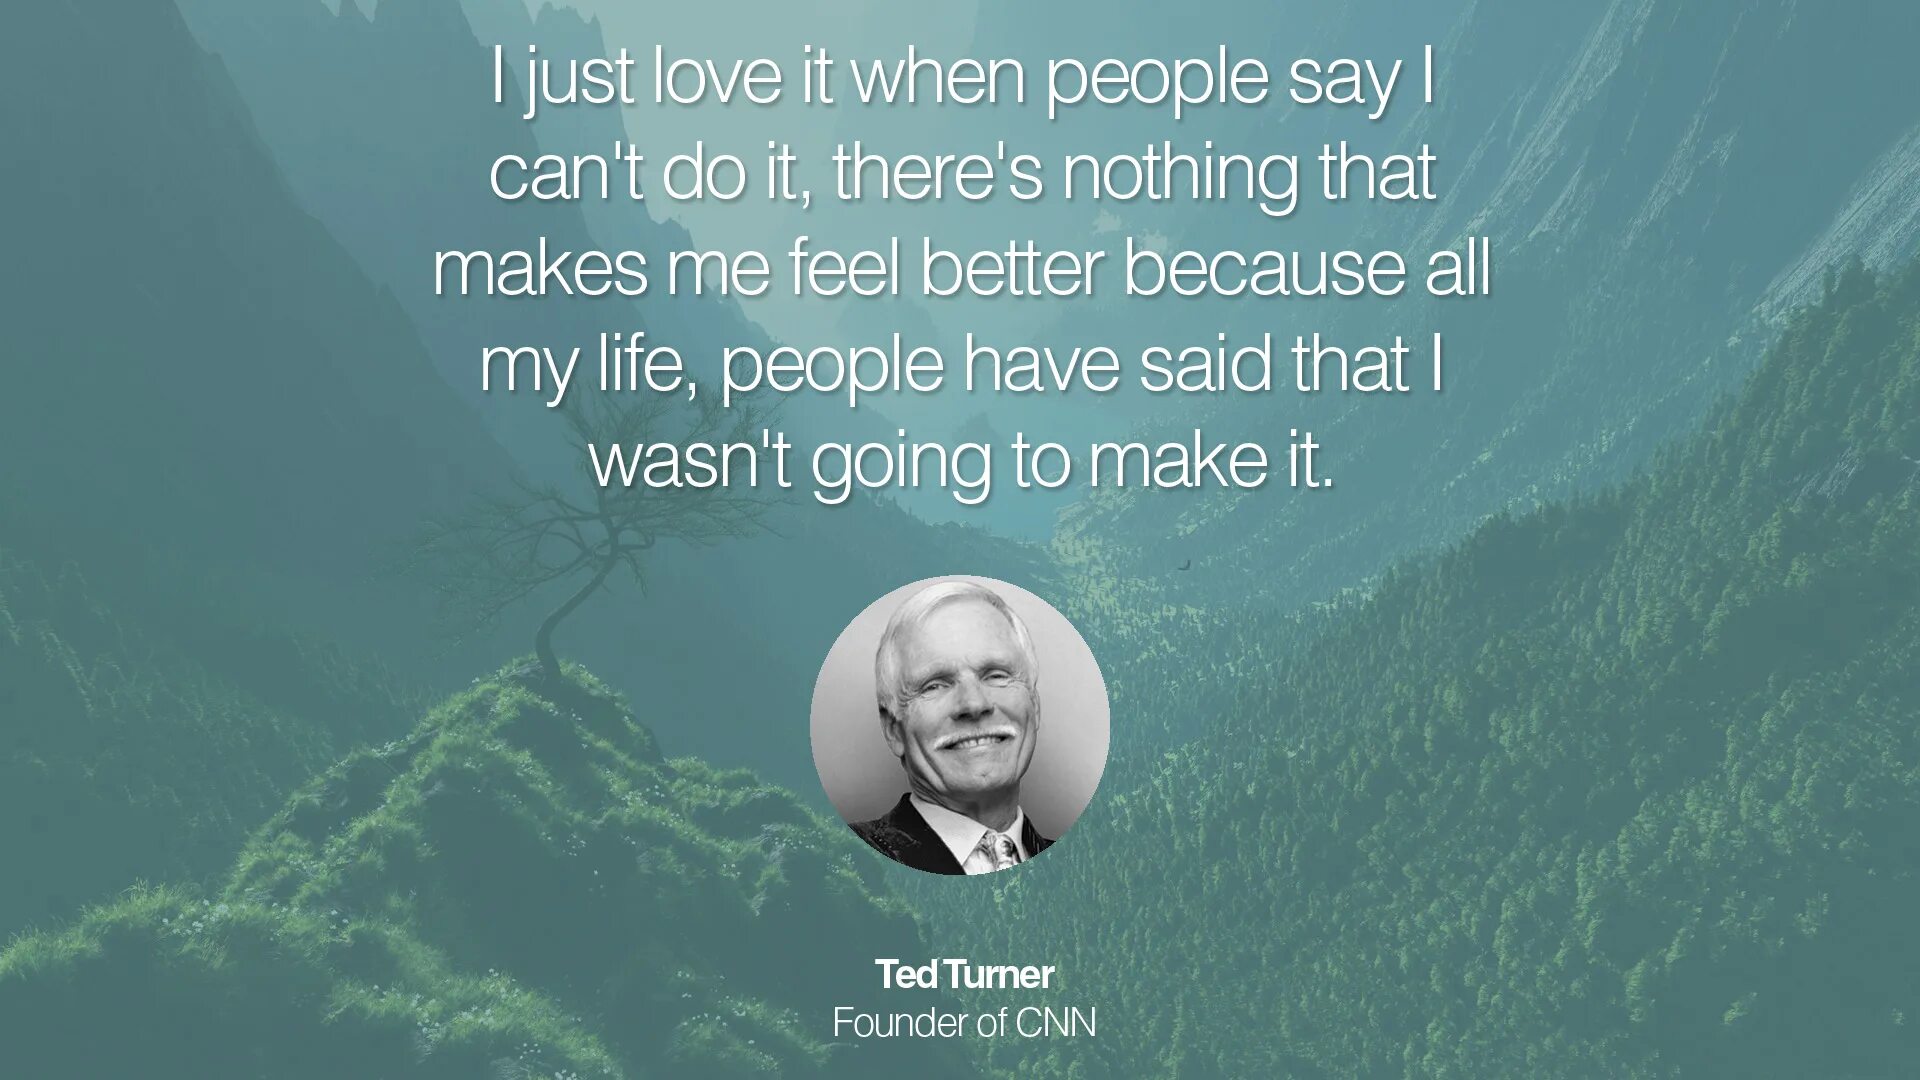 Famous mean. Quotes about Business by famous people. Inspirational quotes in English. English Motivation quotes. Inspiration quotes in English.